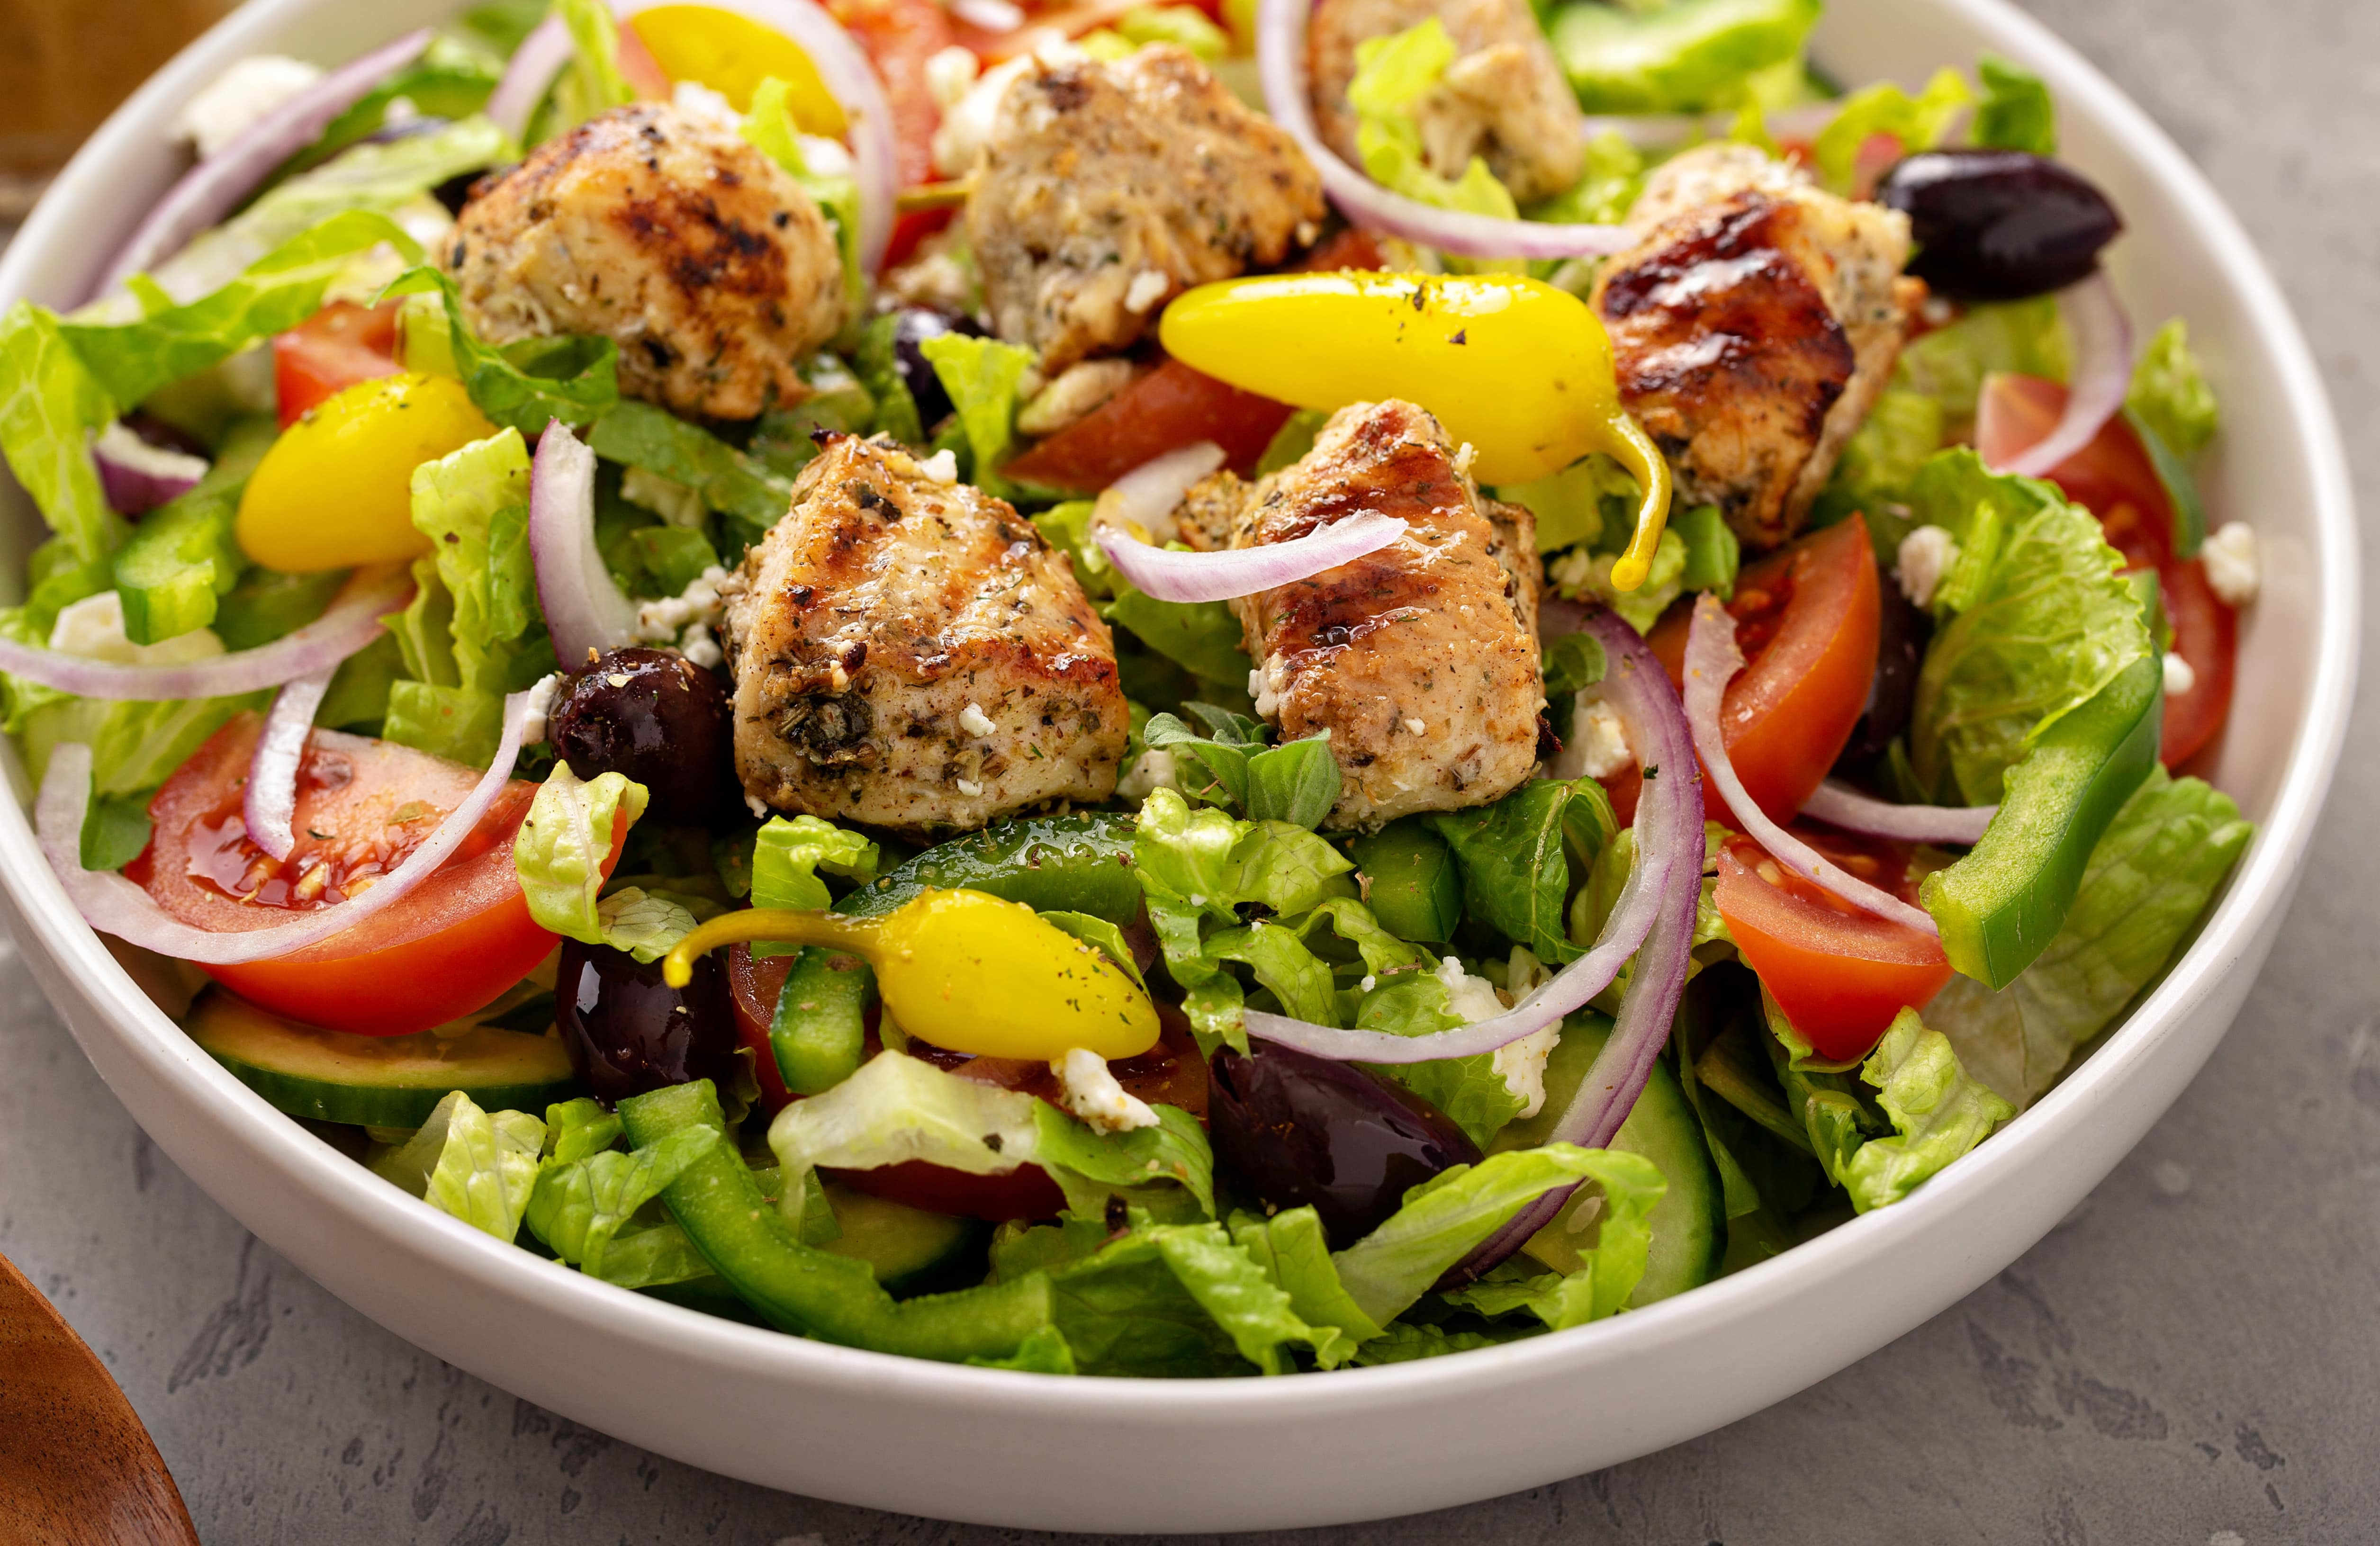 Poultry Dinners: Roasted Chicken & Pepper Salad – Simple App Help Center